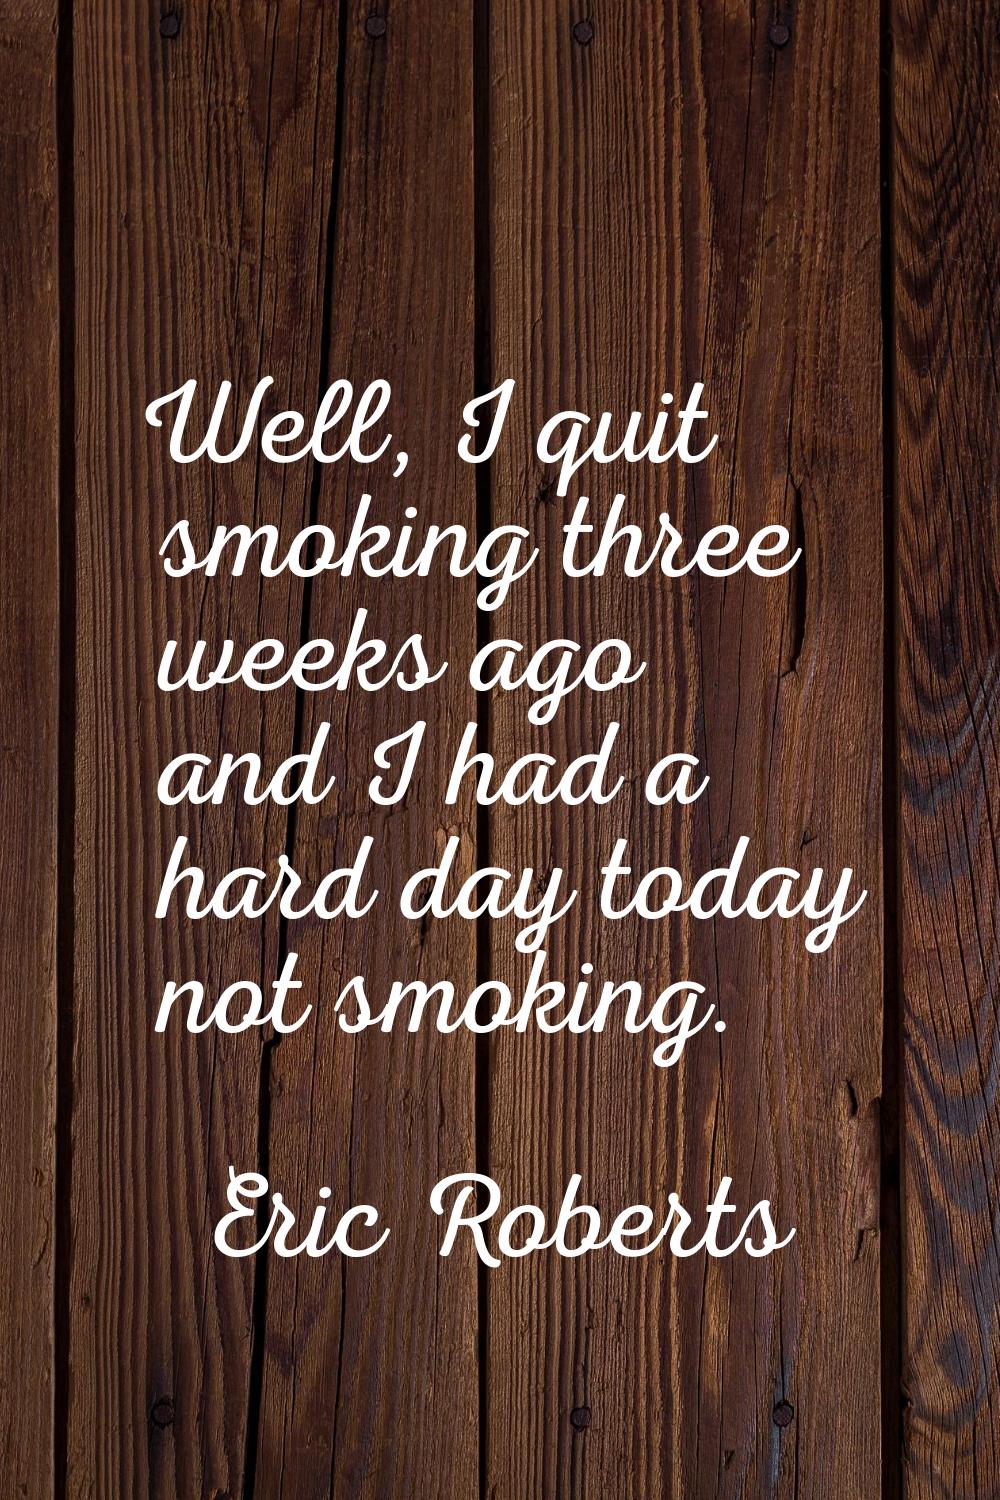 Well, I quit smoking three weeks ago and I had a hard day today not smoking.